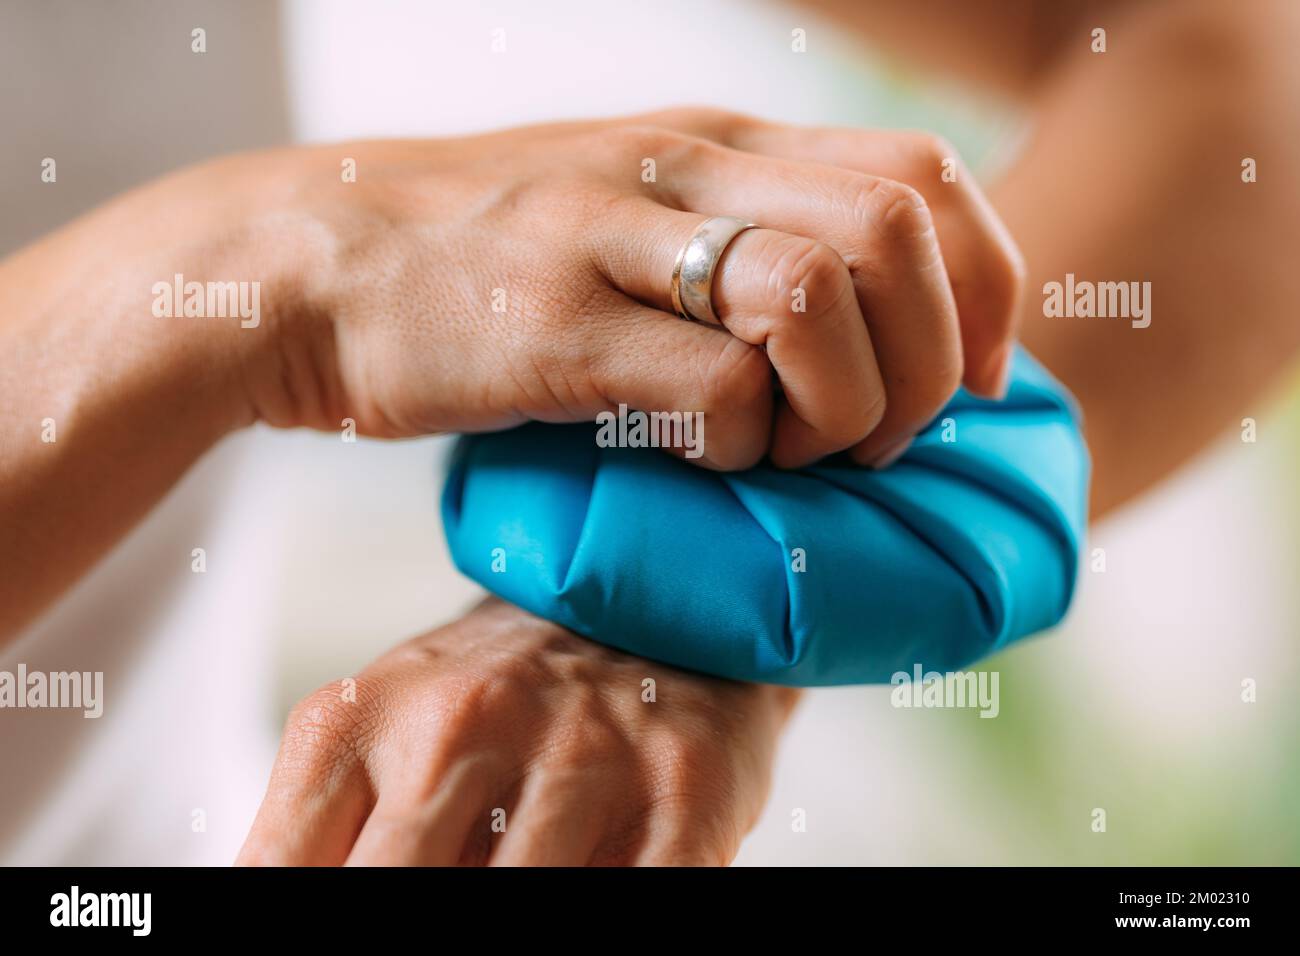 Woman holding ice bag compress on a painful wrist. Stock Photo